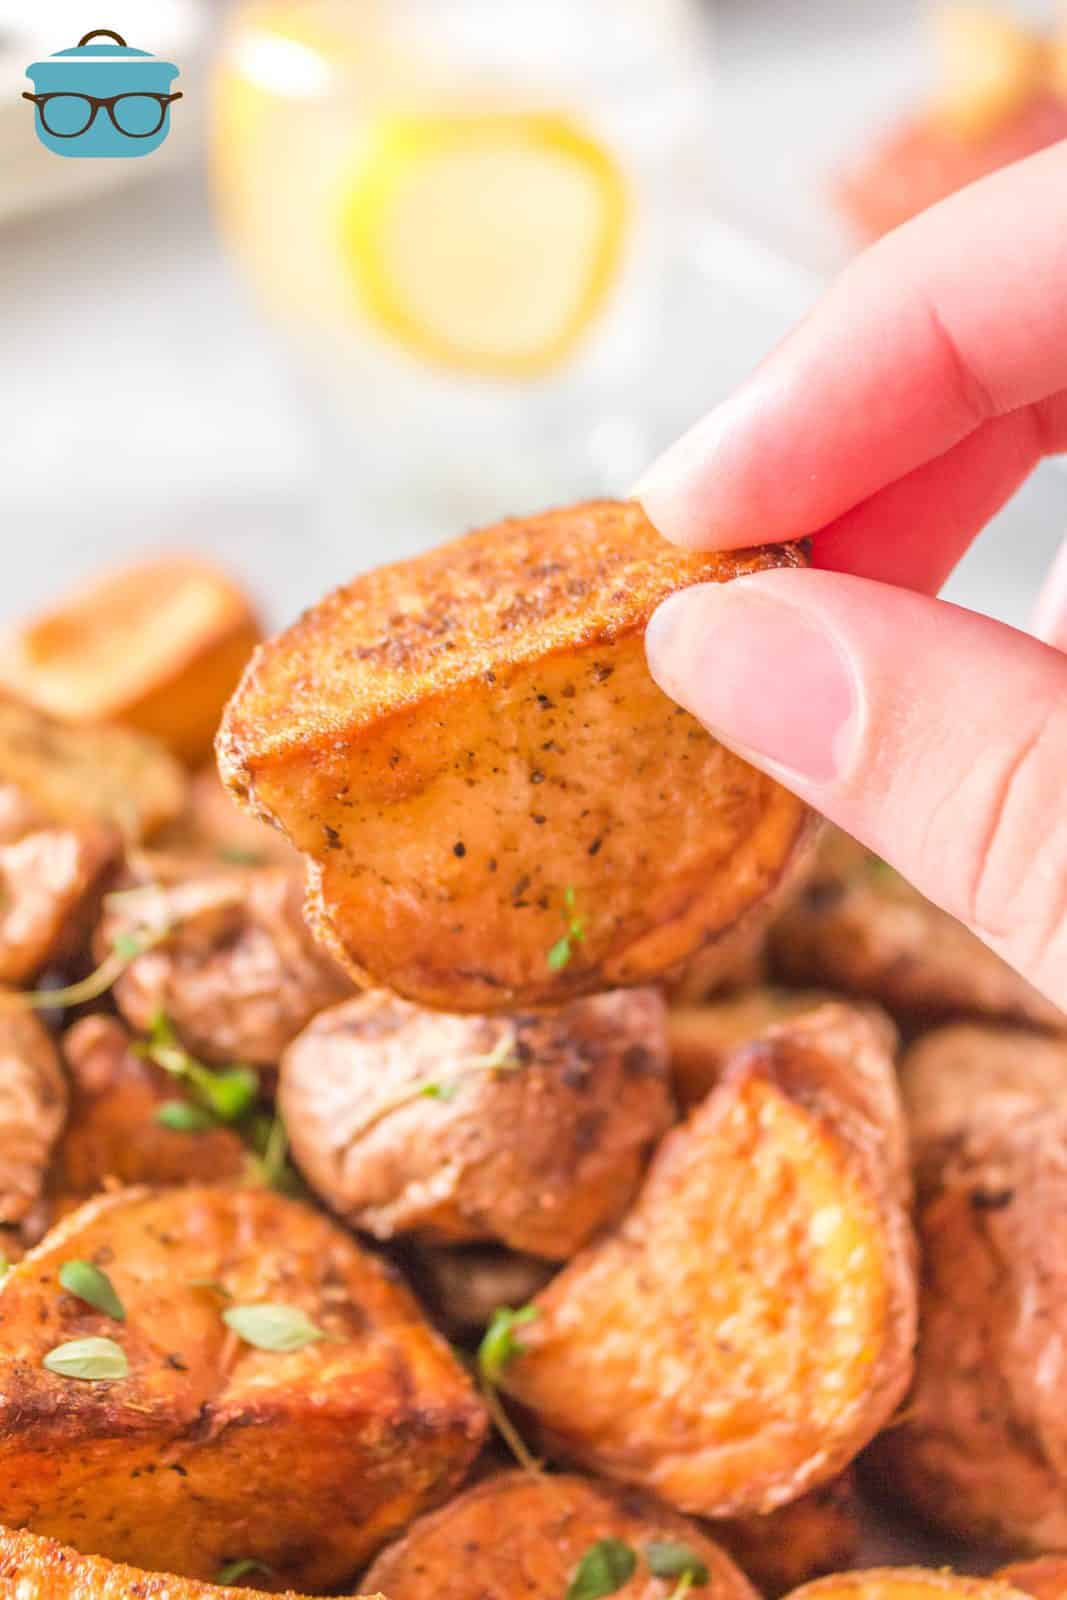 Hand holding up one Air Fryer Roasted Red Potato.